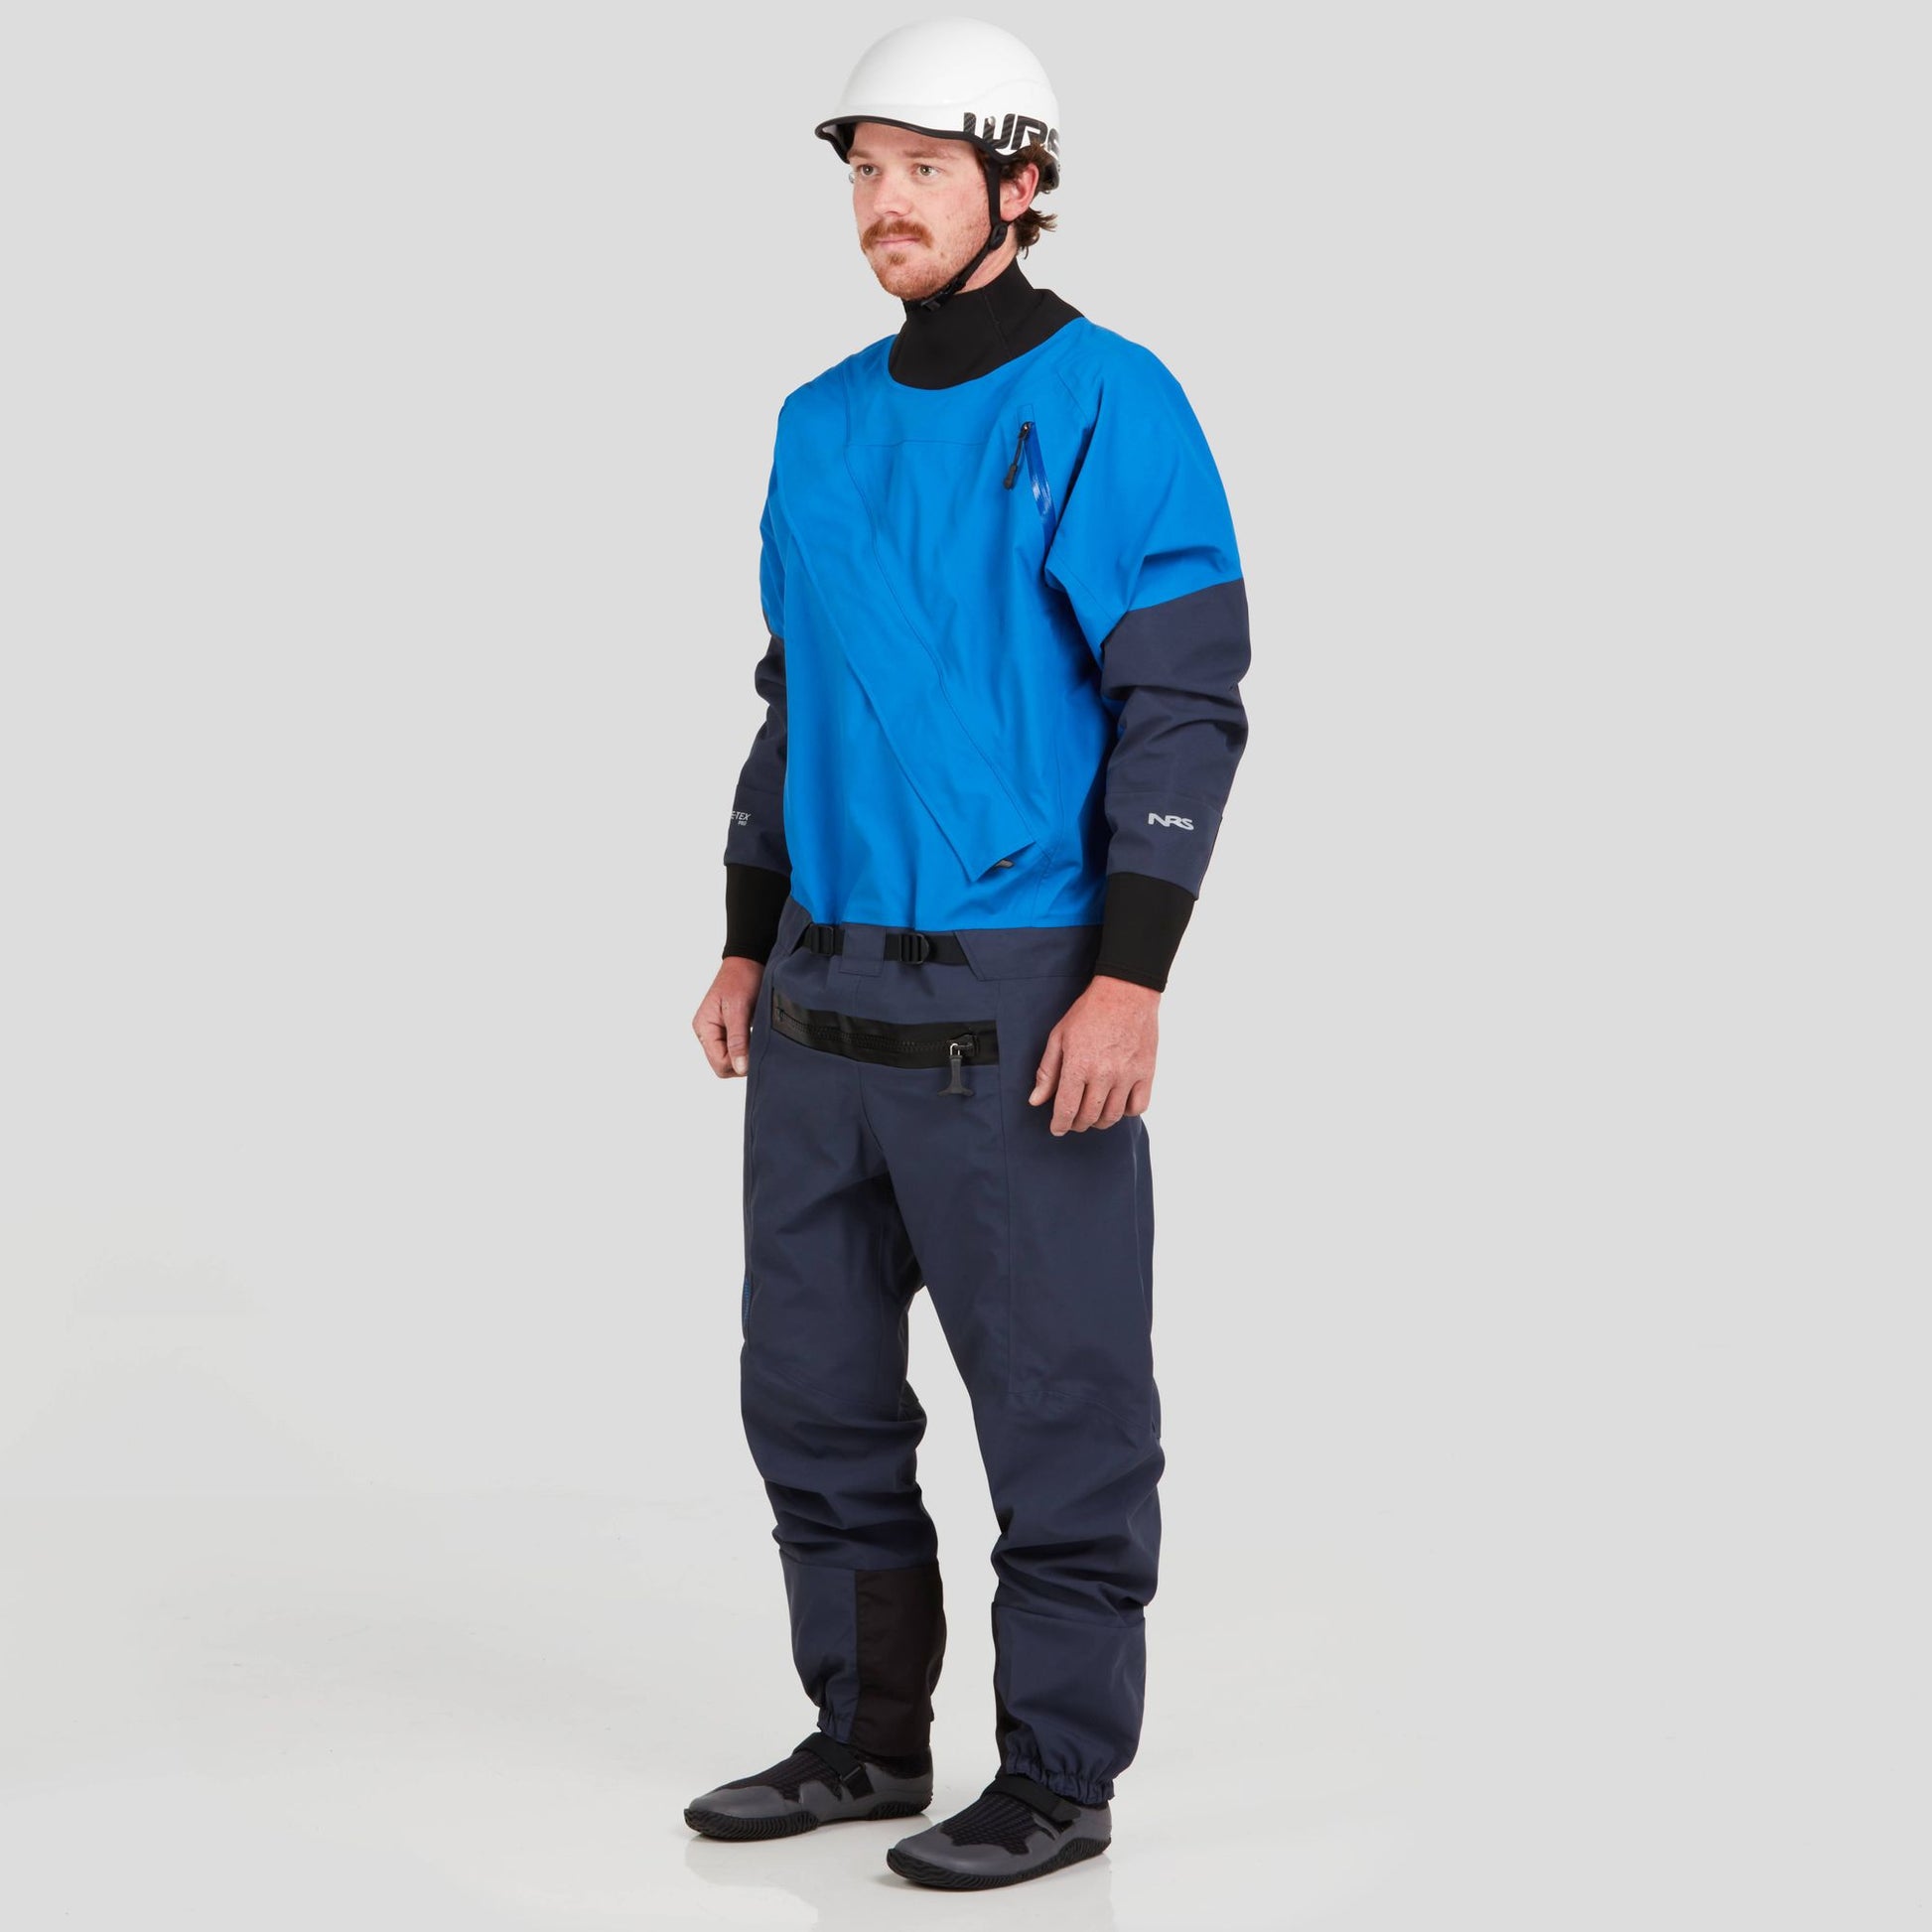 A person wearing the NRS Men's Nomad GORE-TEX Pro Semi-Dry Suit, which includes a blue top, black pants, a white helmet, and black shoes.